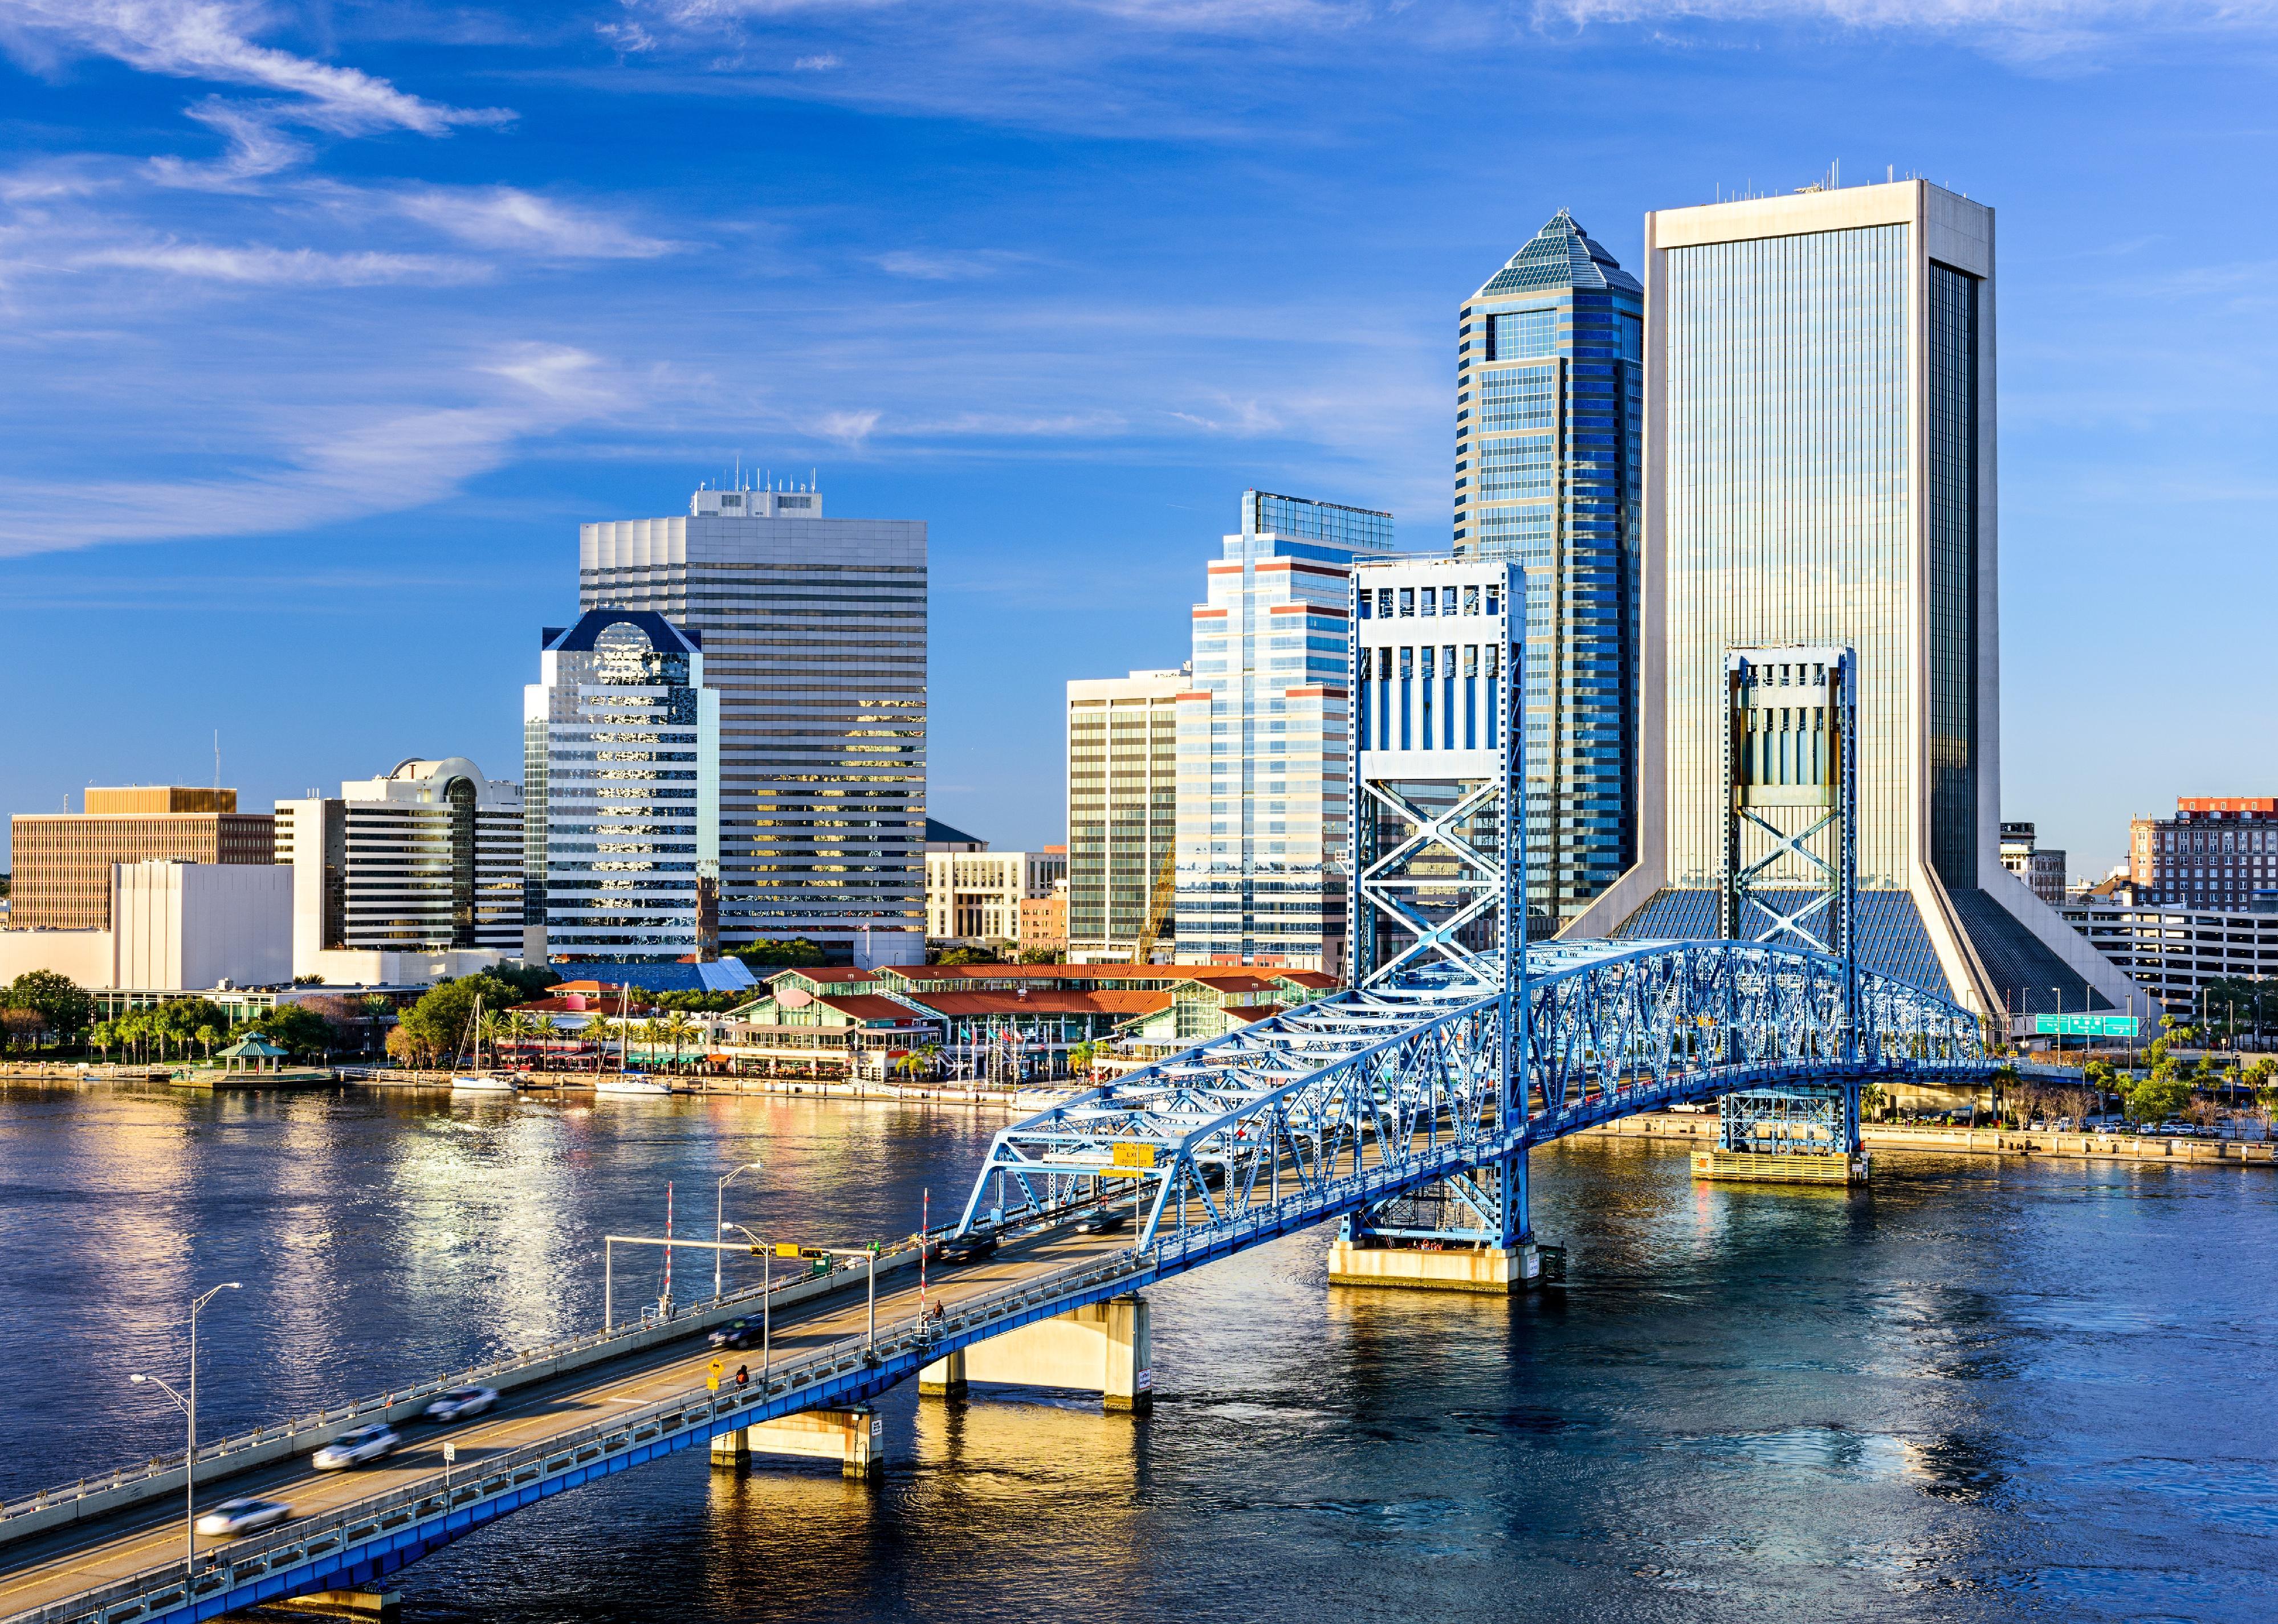 Aerial view of the Main Street Bridge on Jacksonville's riverfront.